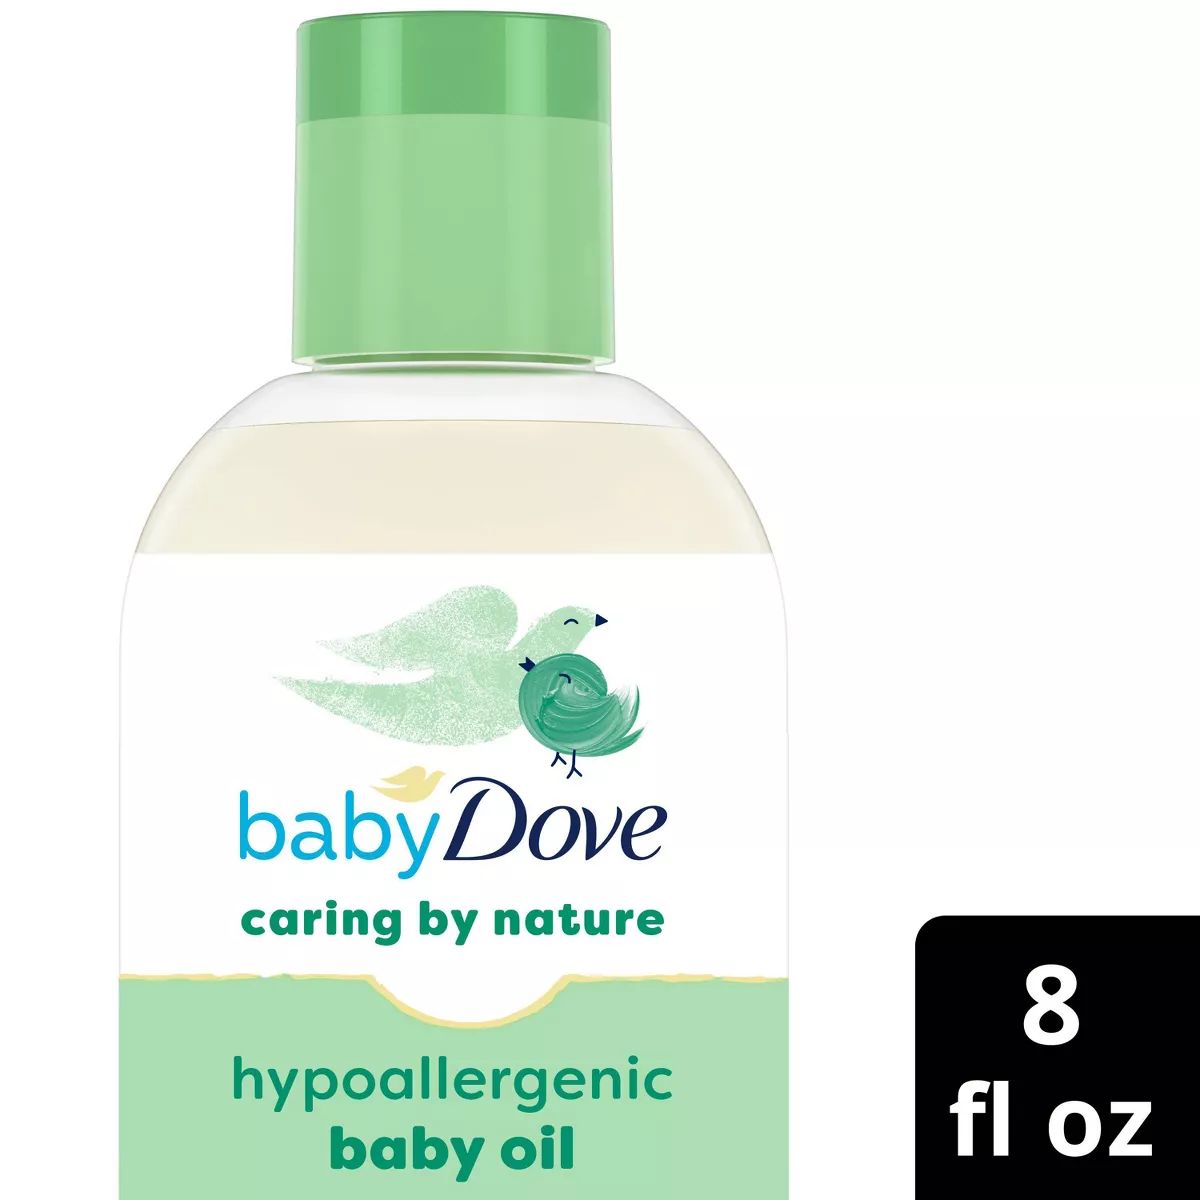 Baby Dove Caring by Nature Hypoallergenic Baby Oil - 8 fl oz | Target